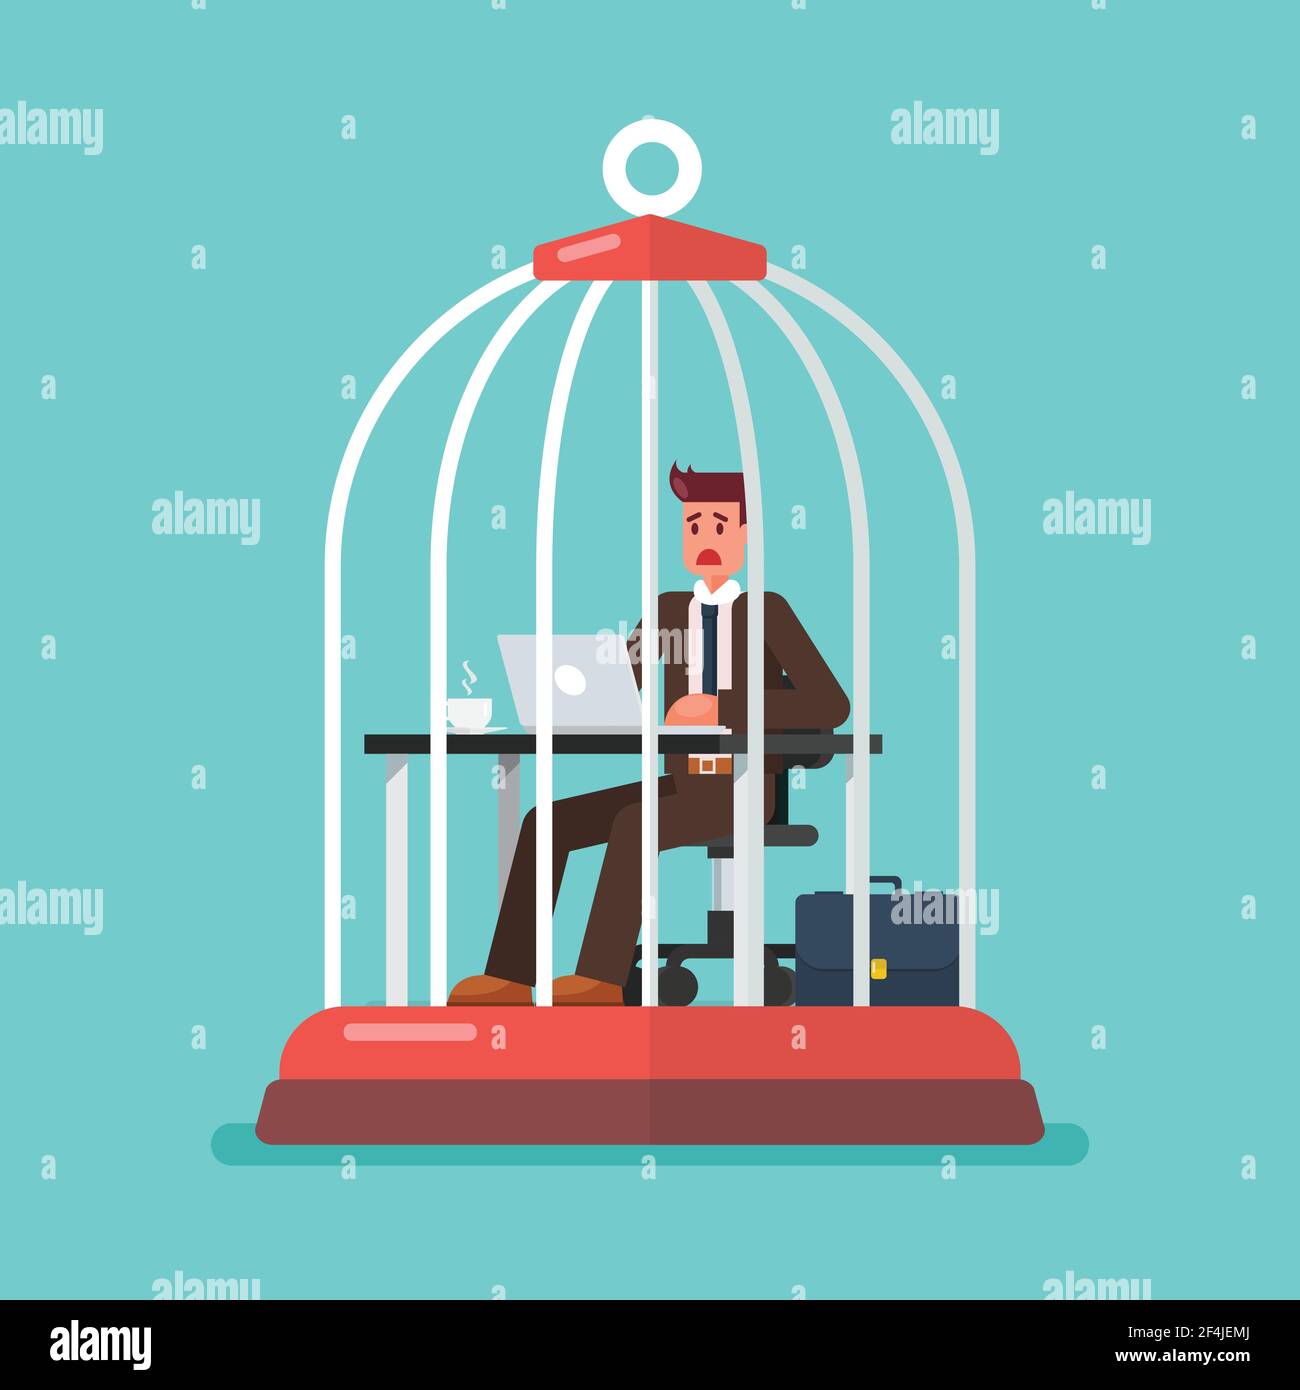 business man working at desk trapped inside birdcage. Stress at work concept. Vector illustration Stock Vector